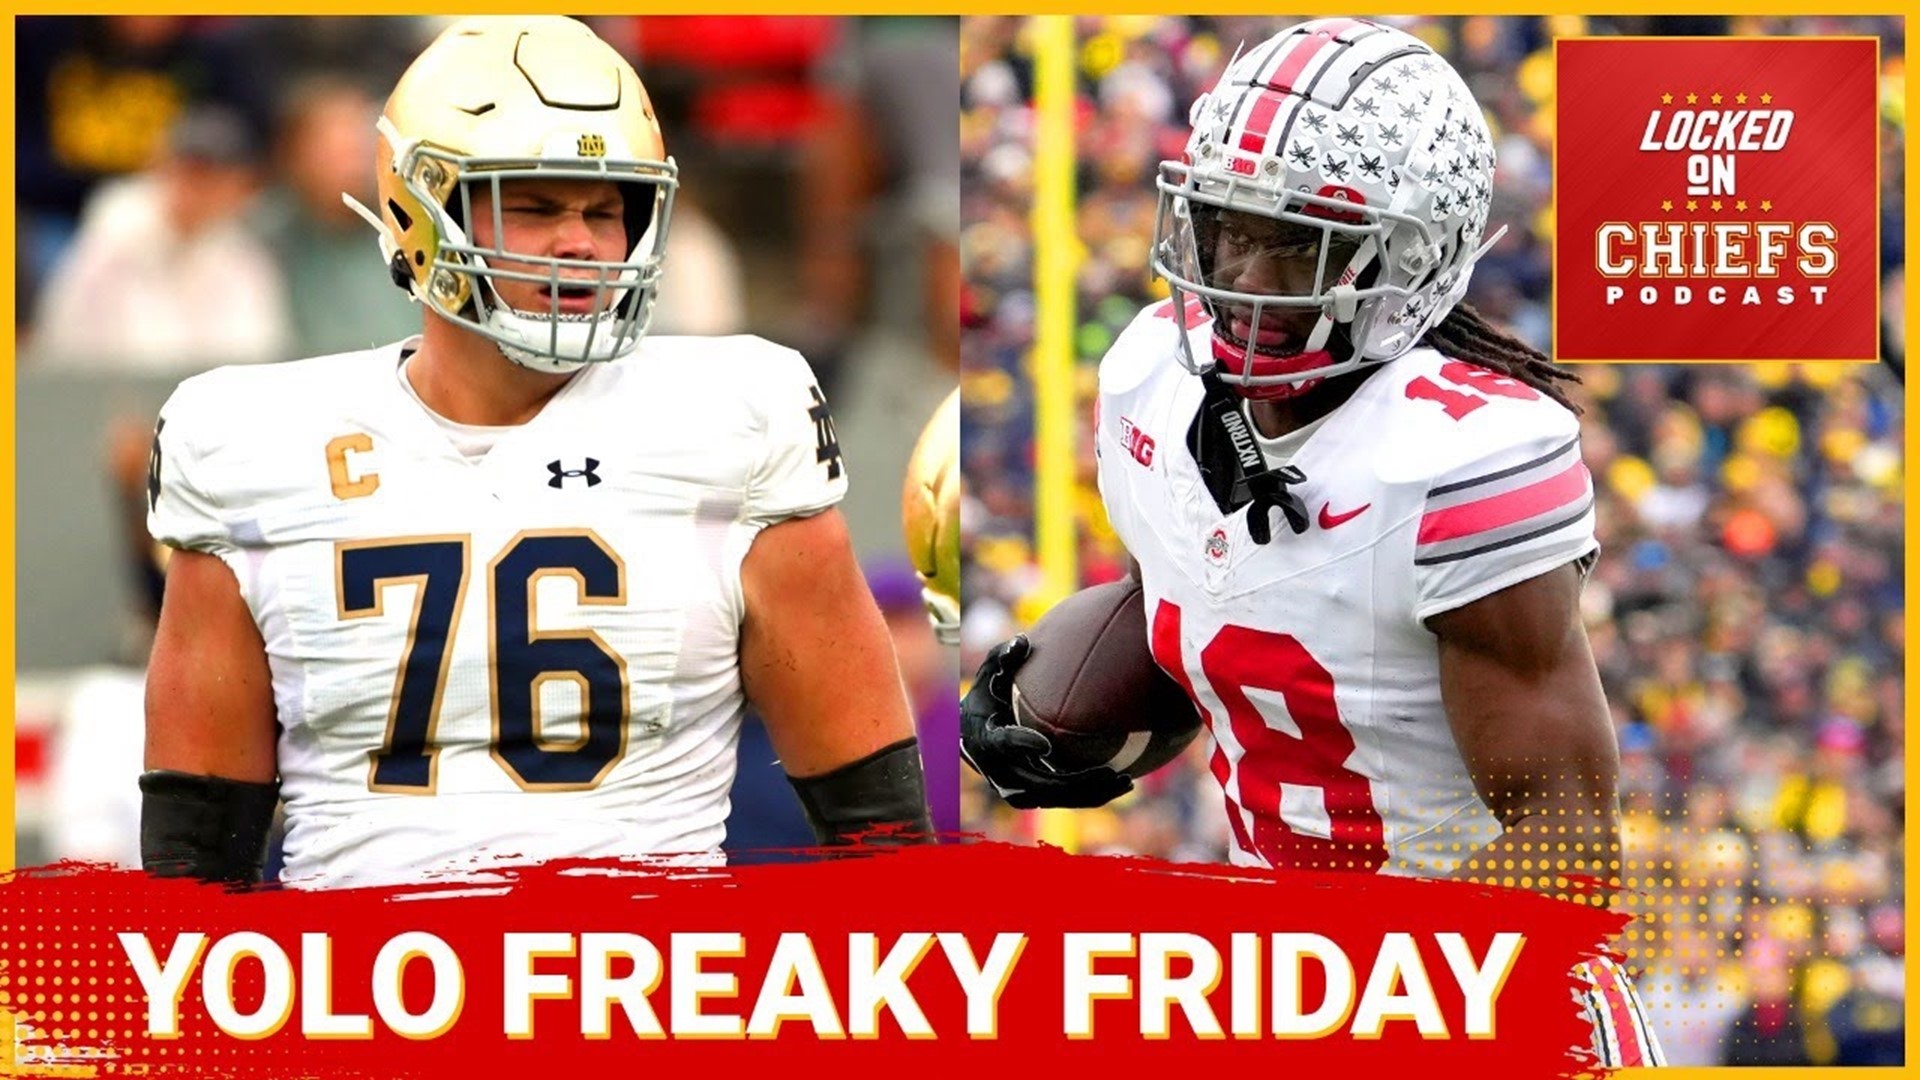 The Kansas City Chiefs made some franchise-changing trades to move up in this edition of Freaky Friday mock draft!